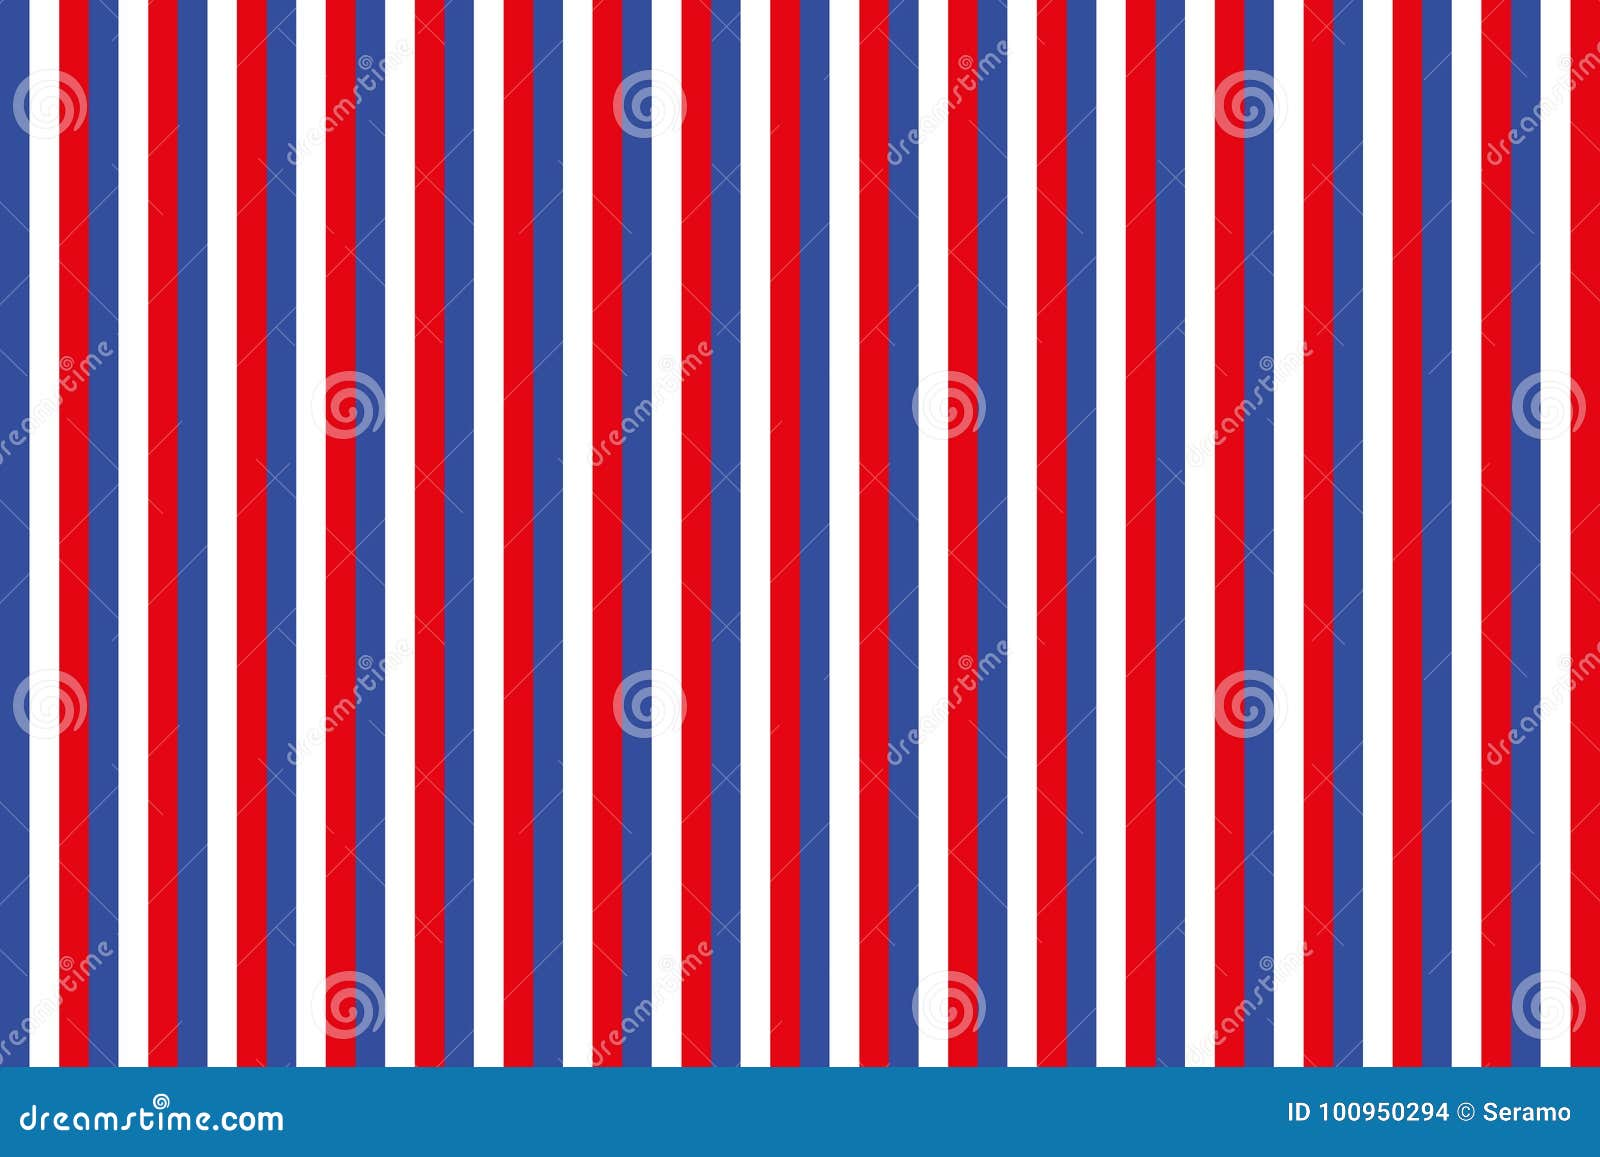 Striped Background Stock Vector Illustration Of Abstract